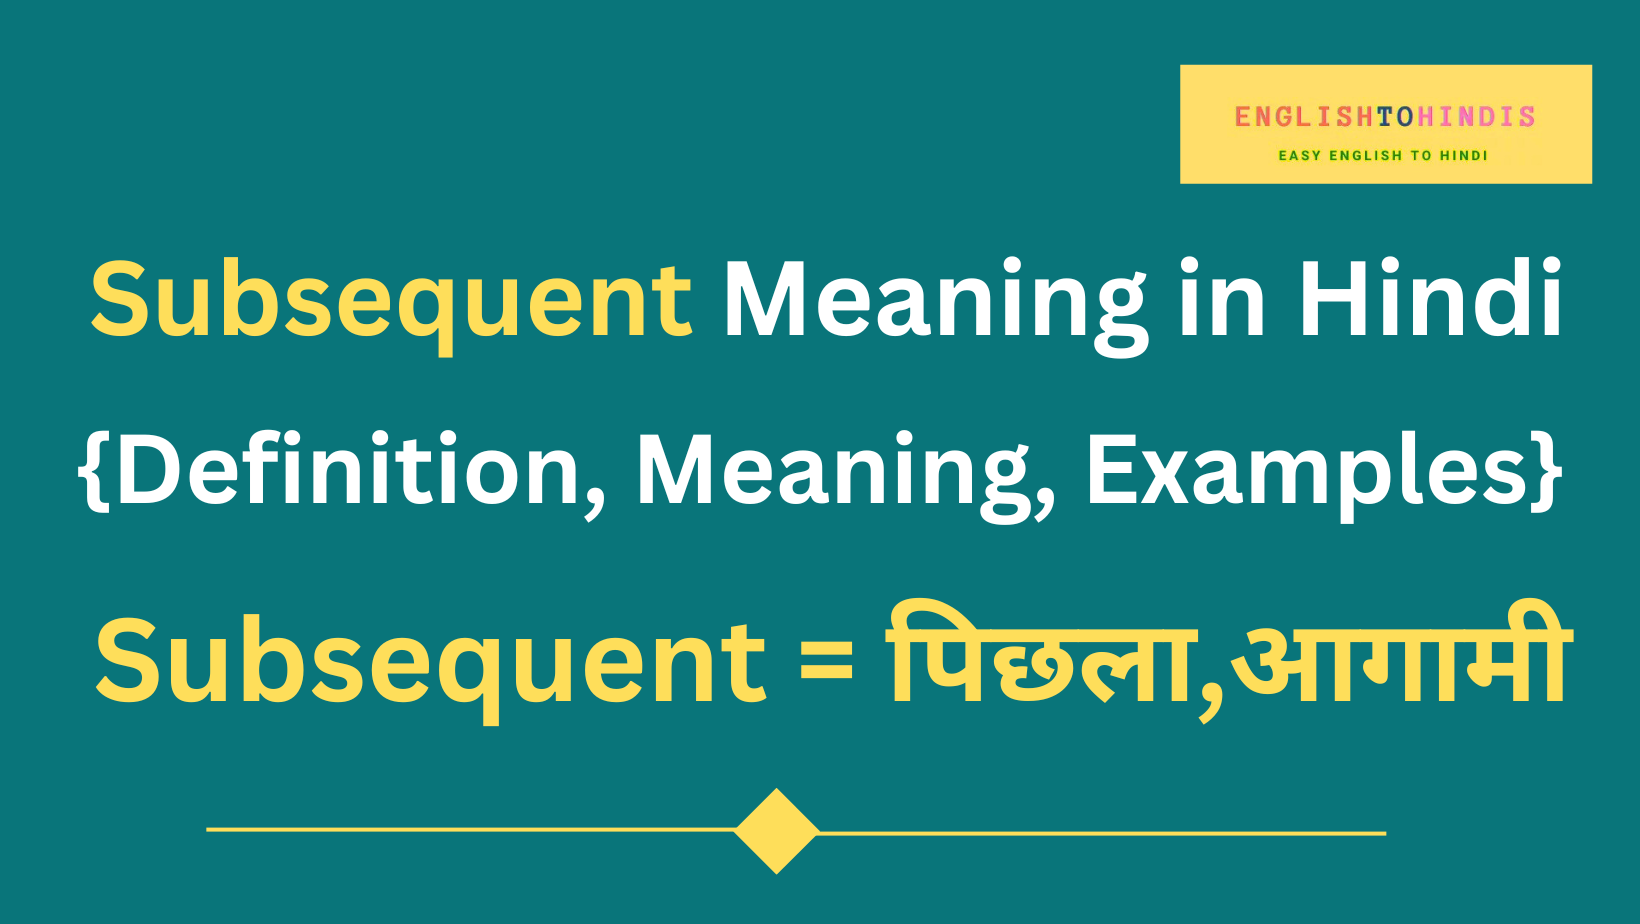 Subsequent Meaning in Hindi